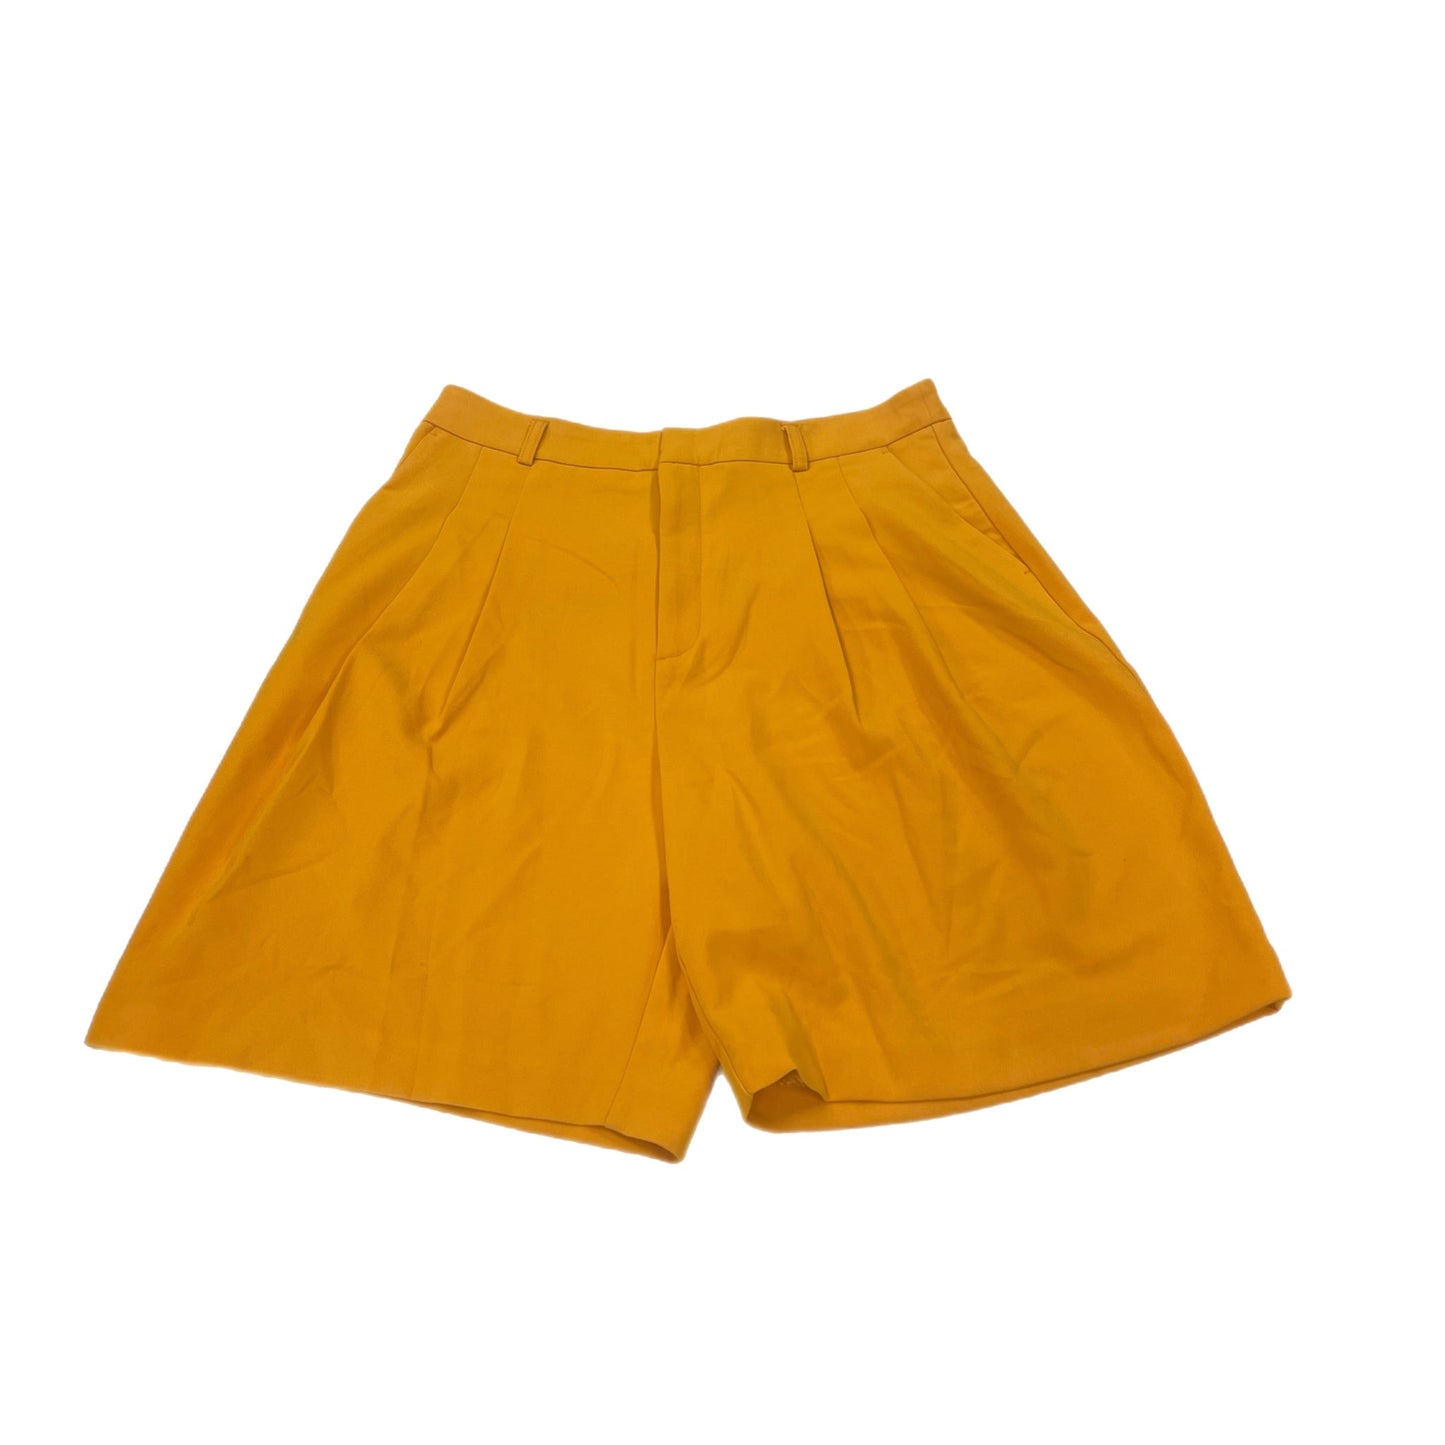 Shorts By Maeve  Size: 12